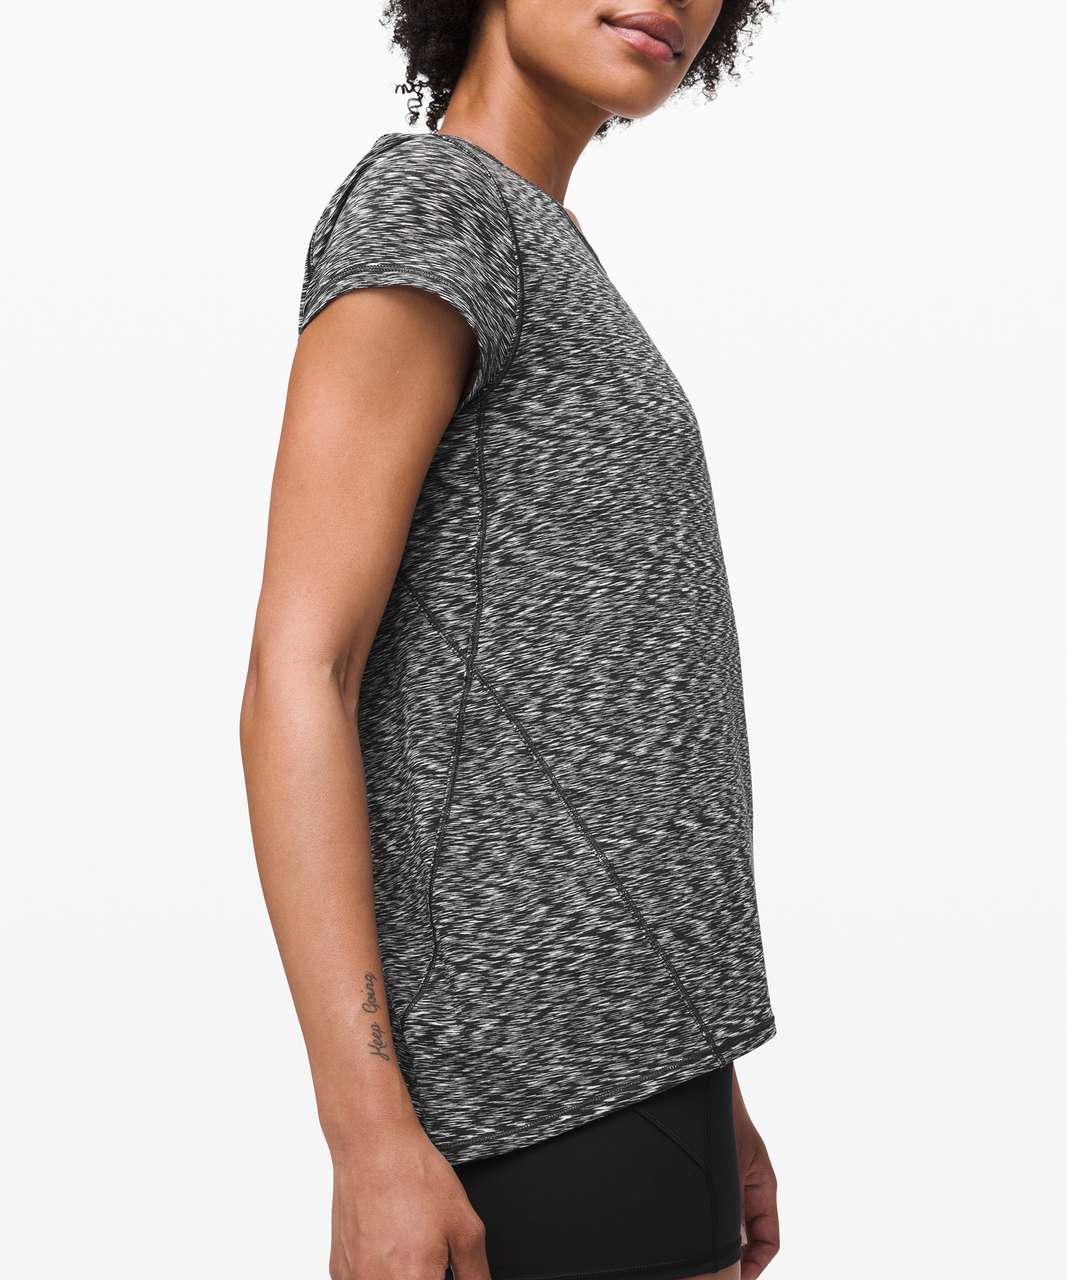 Lululemon Another Mile Short Sleeve - Spaced Out Space Dye Black White